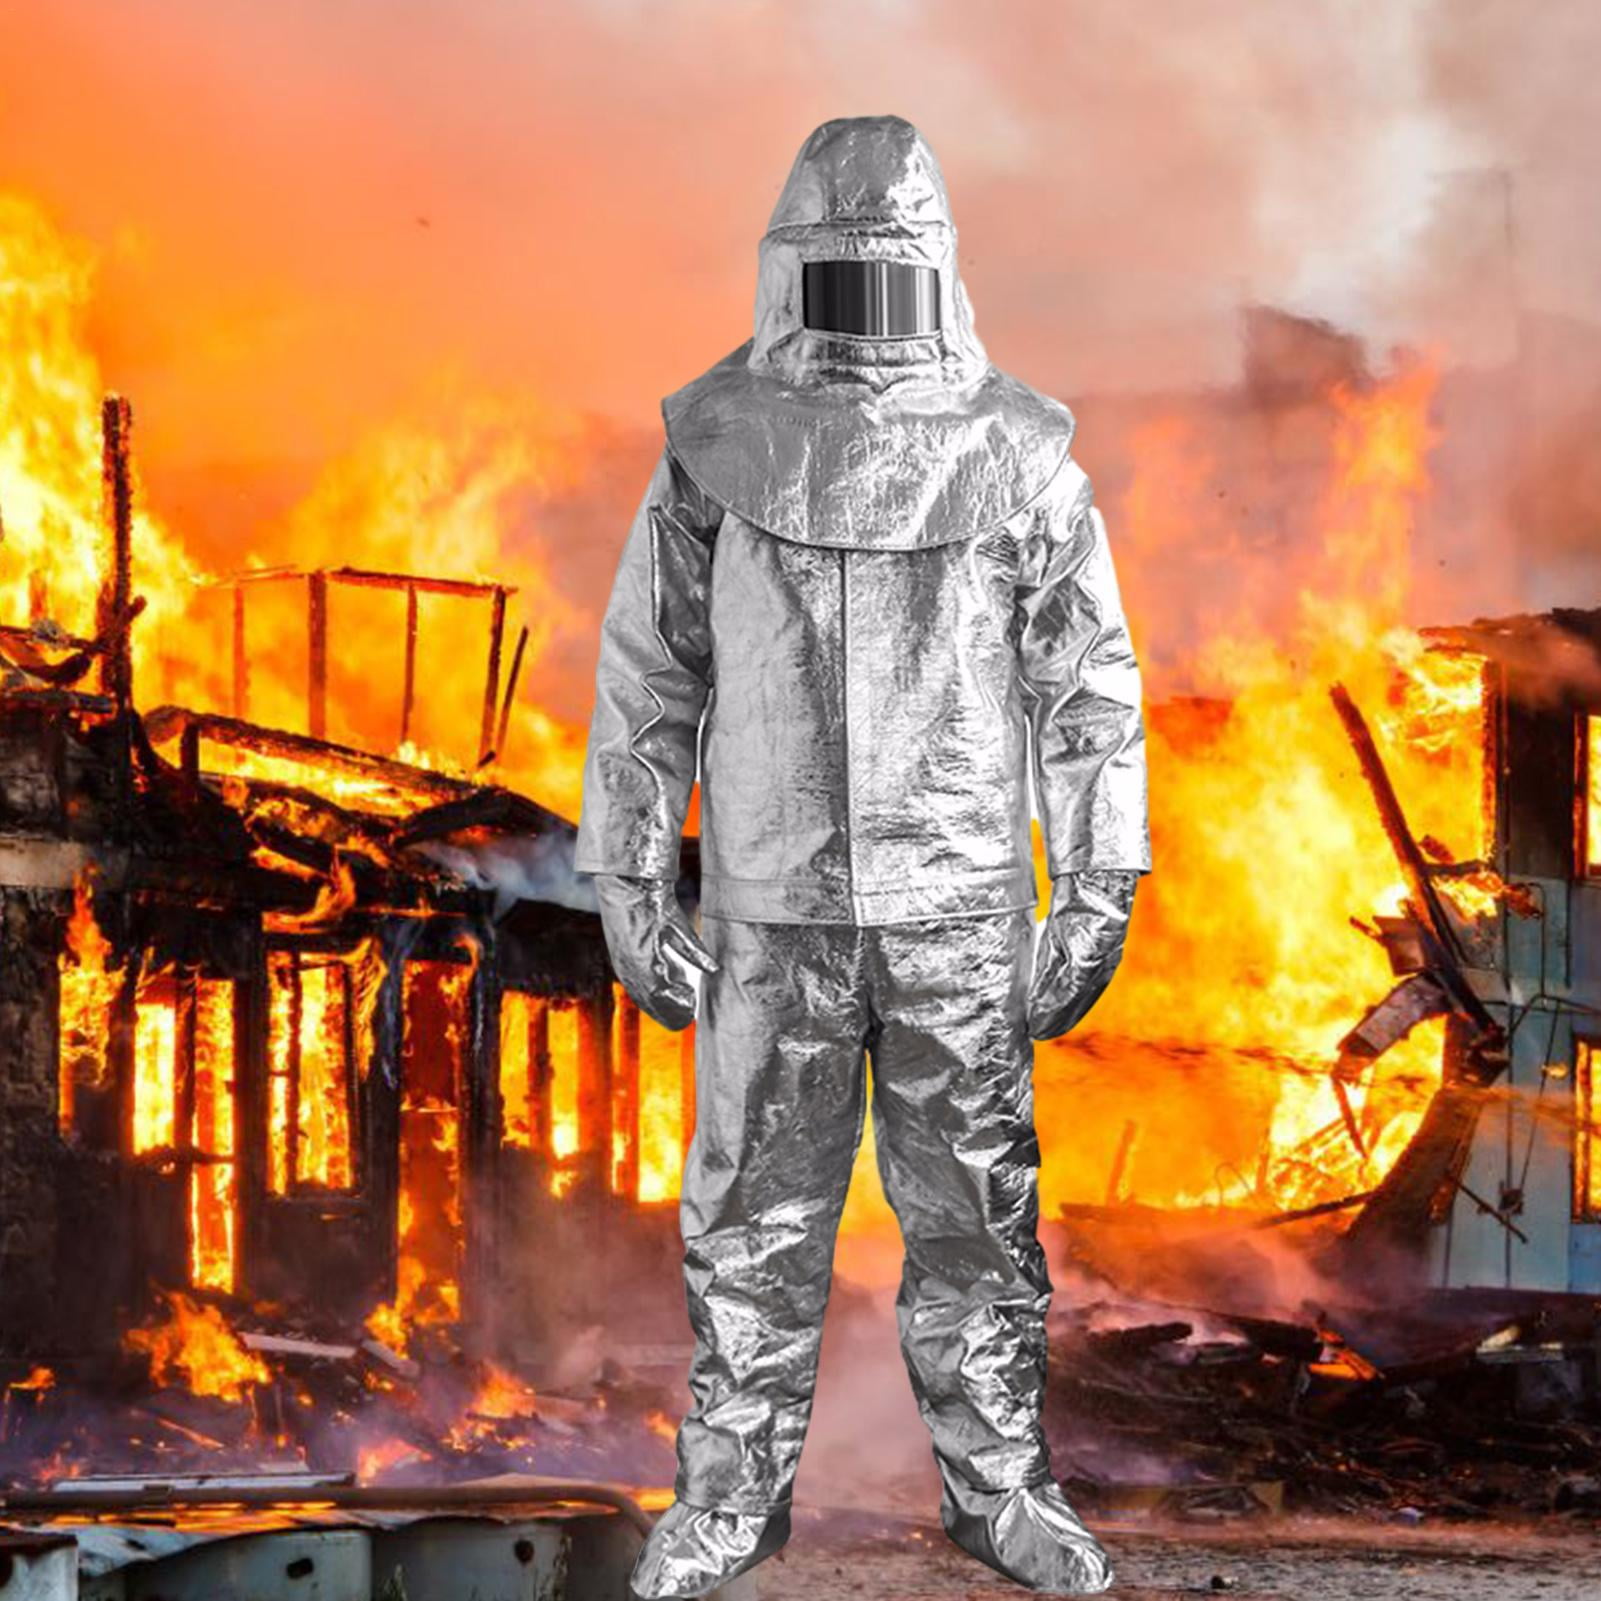 Heat Resistant Clothing Fireproof Suit for Firefighters | Walmart Canada